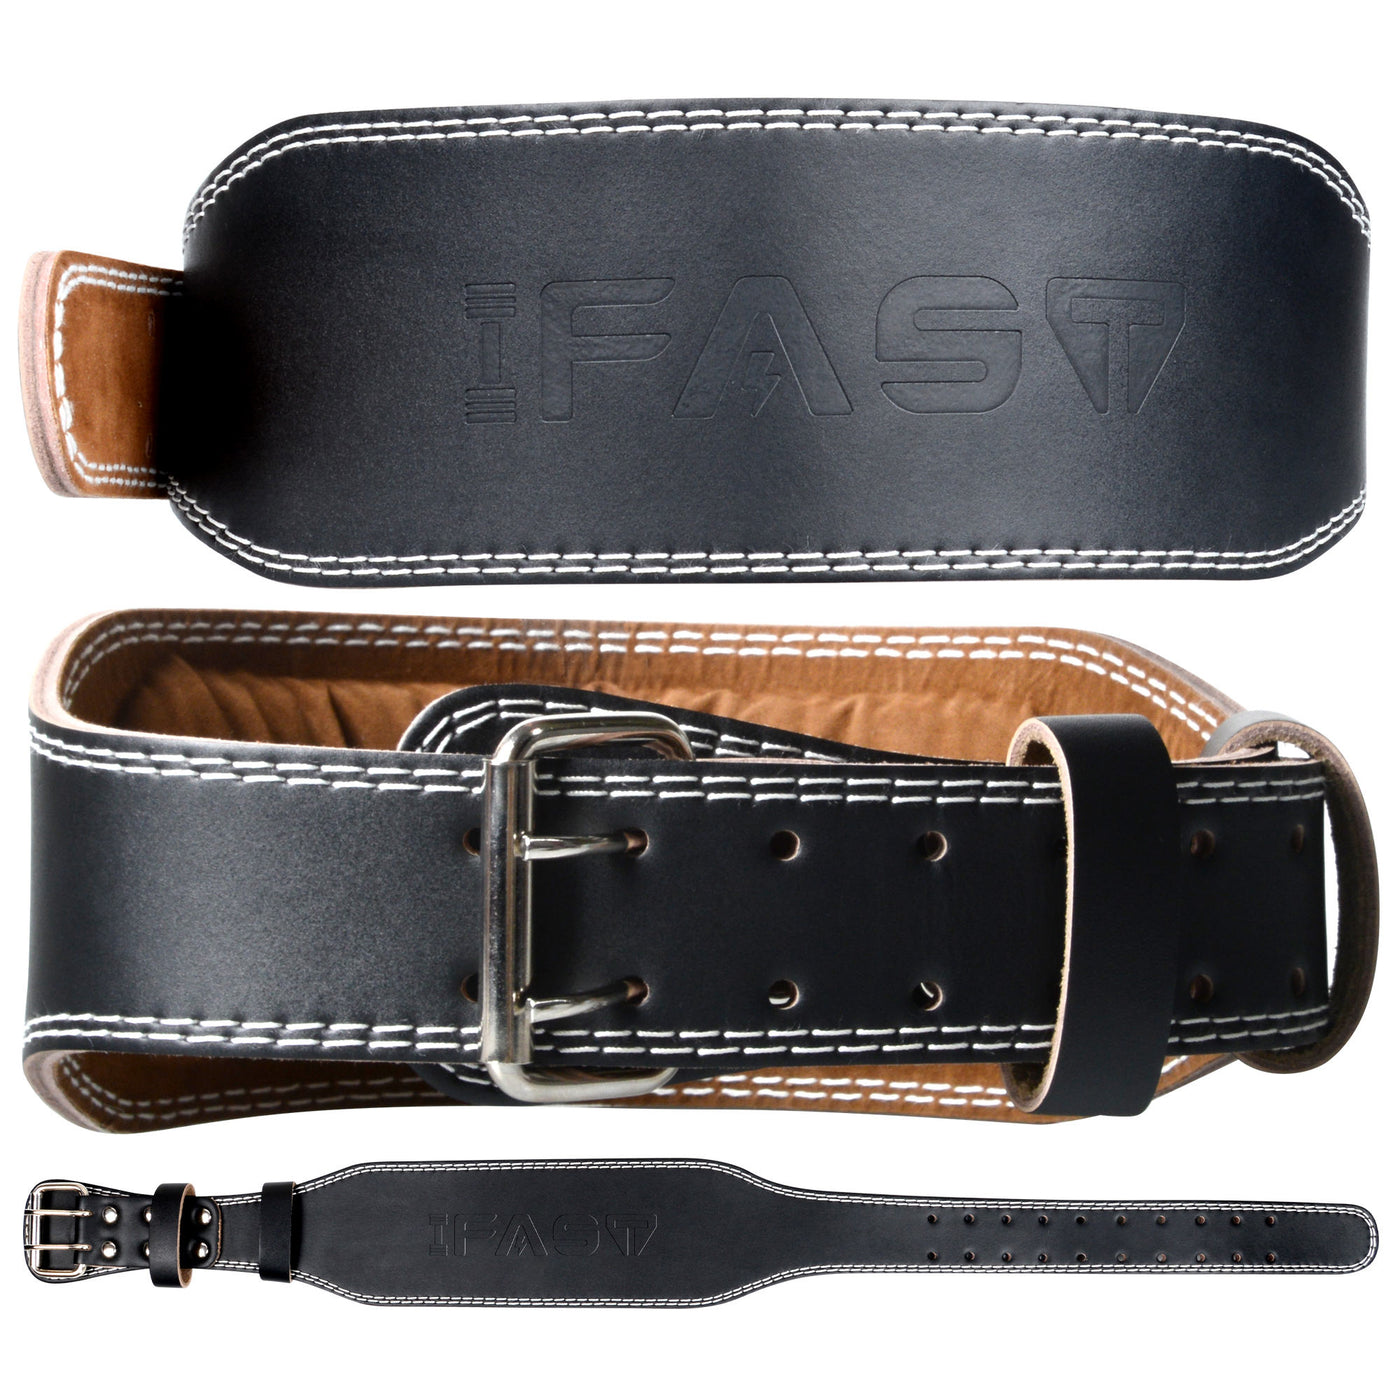 IFAST black weight lifting belts leather